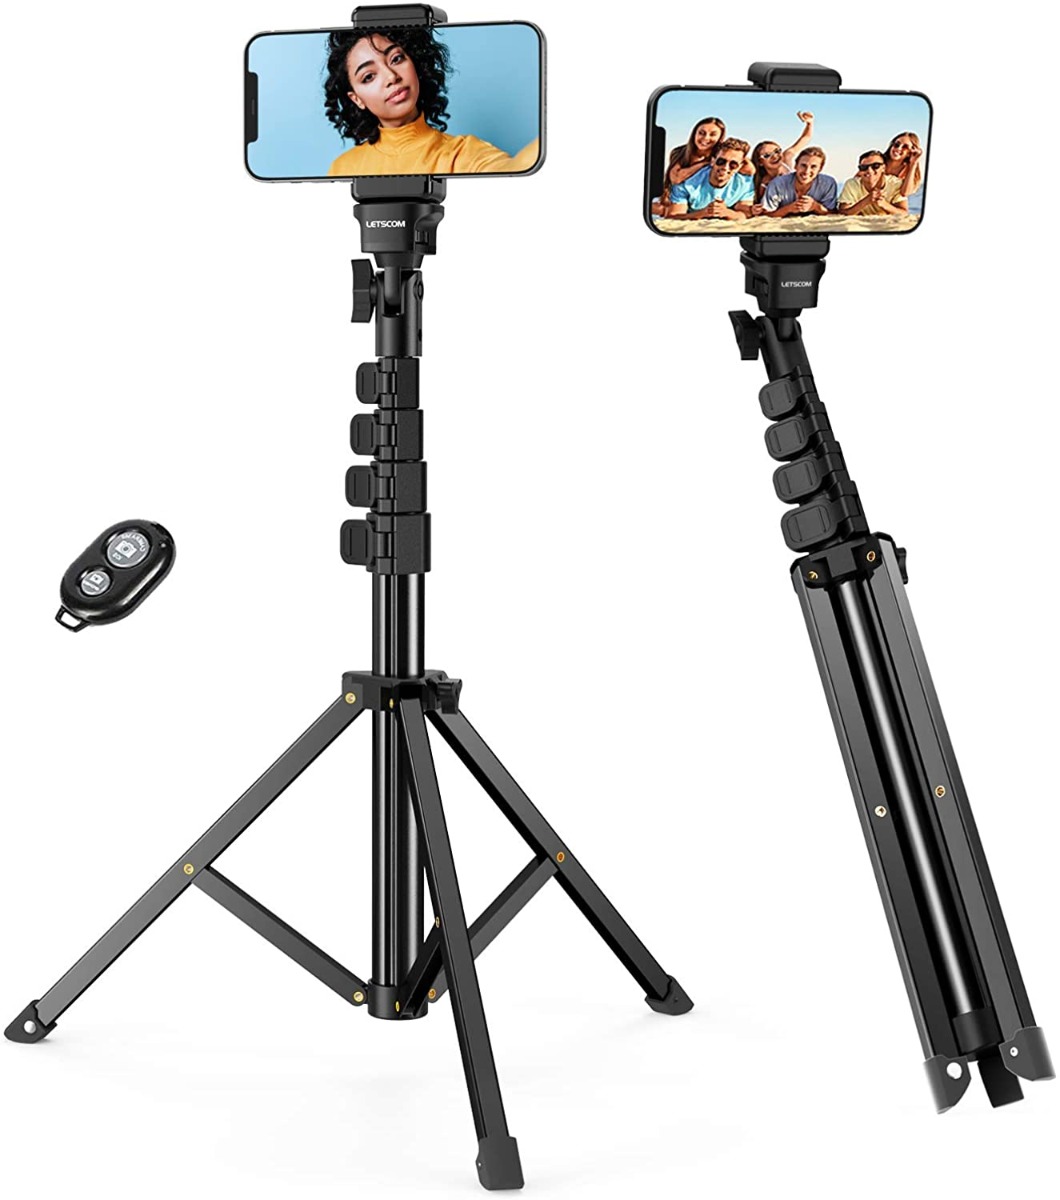 Rummet global Foresee LETSCOM 65-inch Extendable Selfie Stick Tripod Stand with Phone Holder